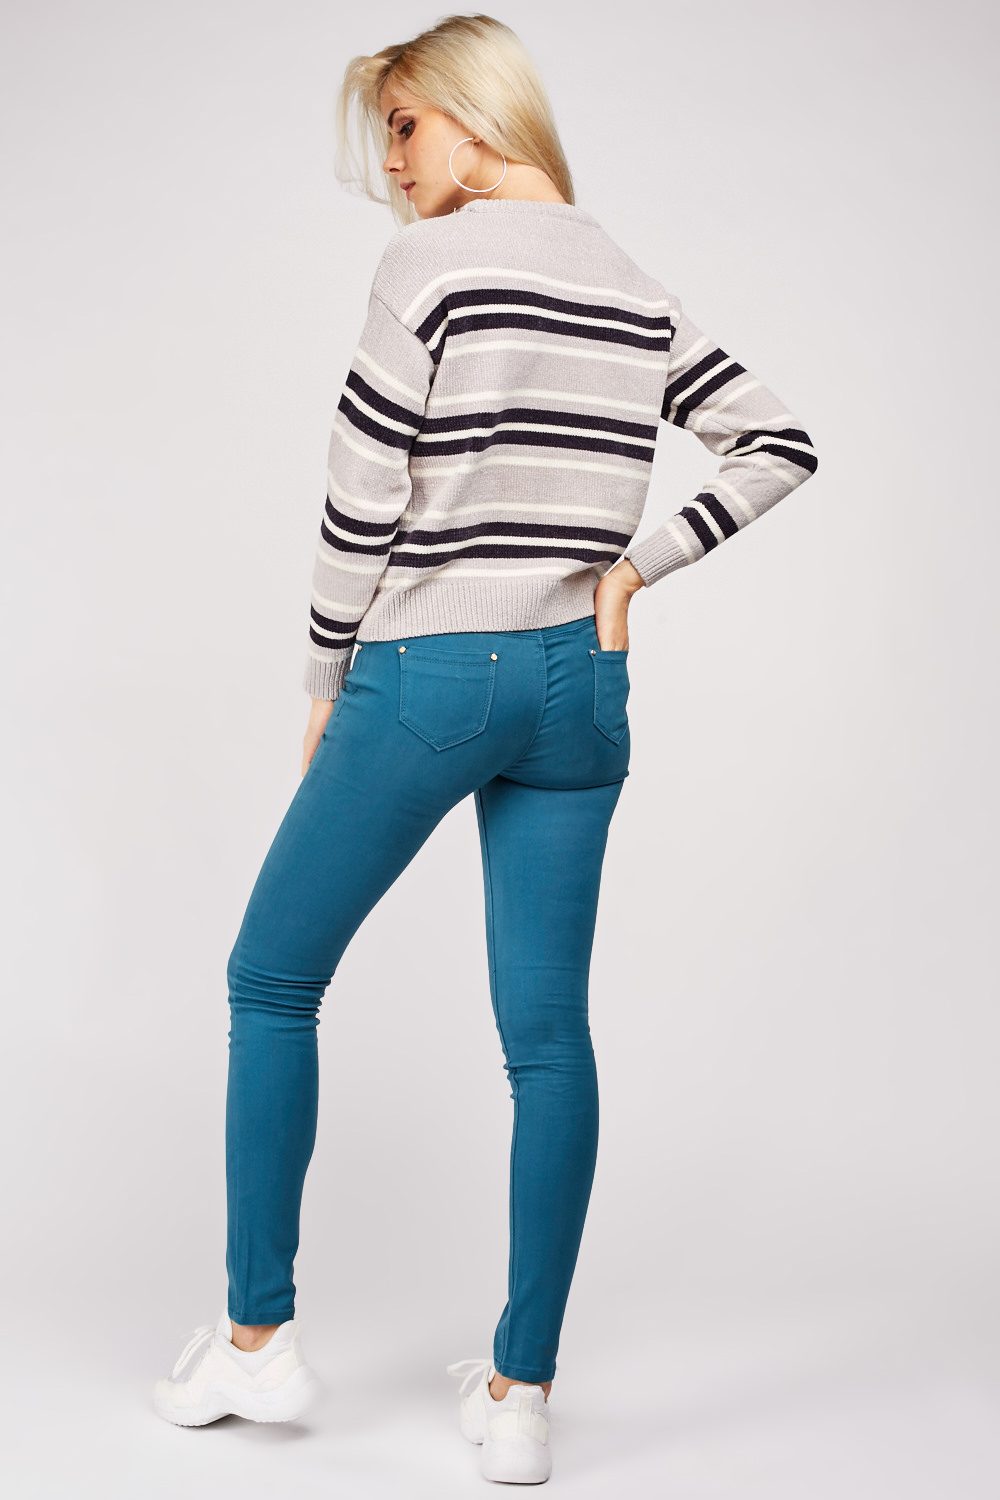 Low Waist Teal Skinny Jeans - Just $6